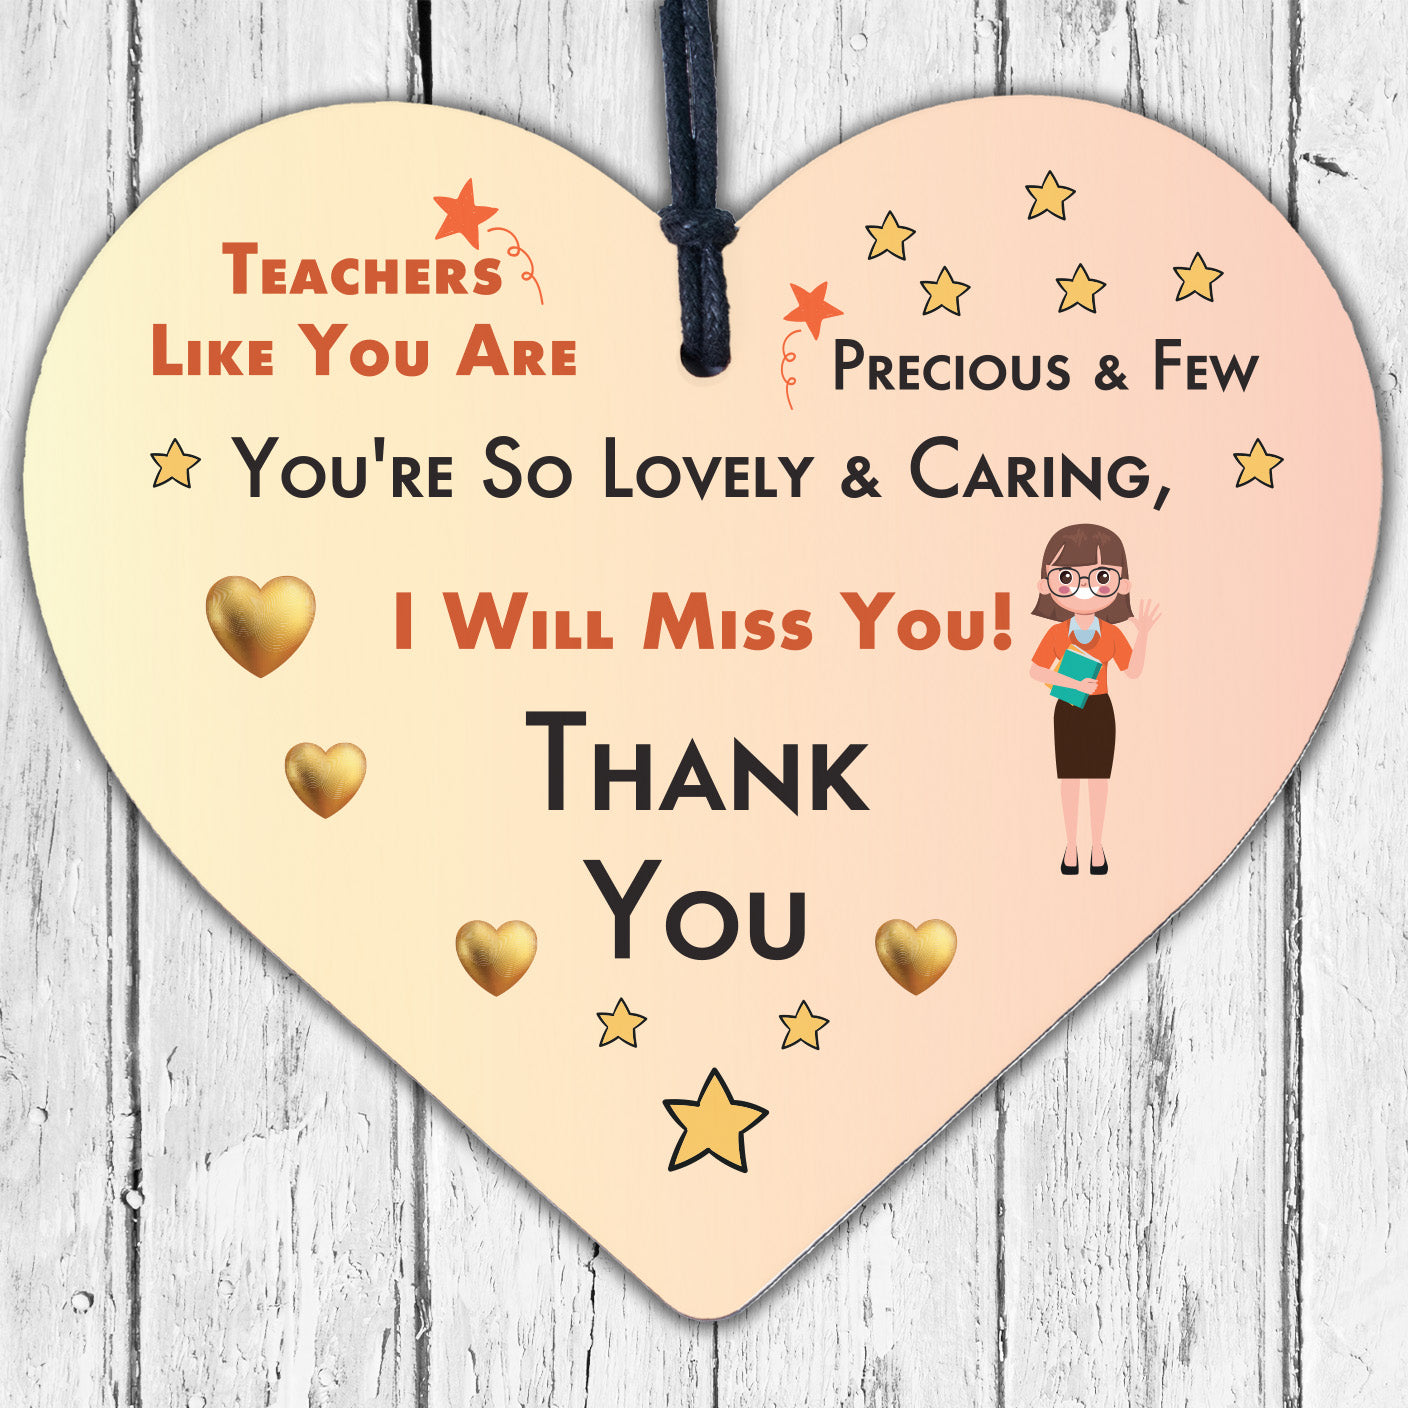 Teachers Are Precious Wooden Hanging Heart Shabby Chic Thank You Plaque Gift